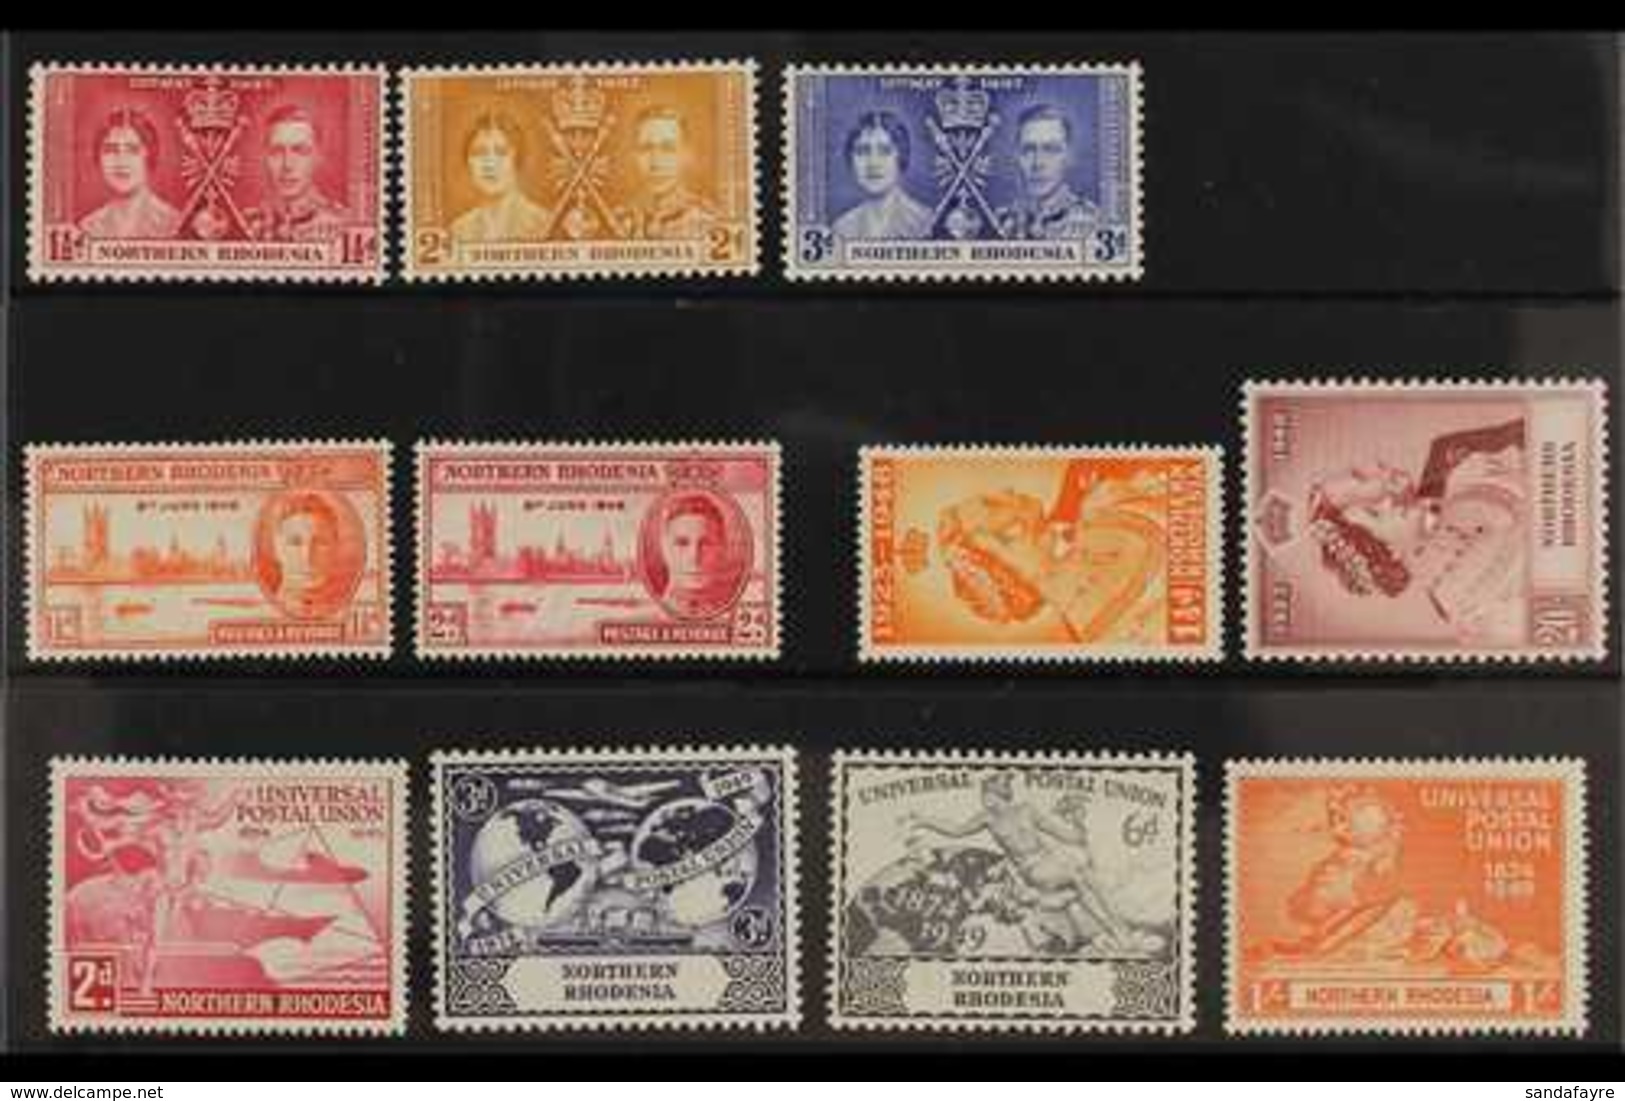 1937-1949 COMPLETE FINE MINT COLLECTION On Stock Cards, Includes 1938-52 Set, 1948 Wedding Set Etc. Fresh. (32 Stamps) F - Northern Rhodesia (...-1963)